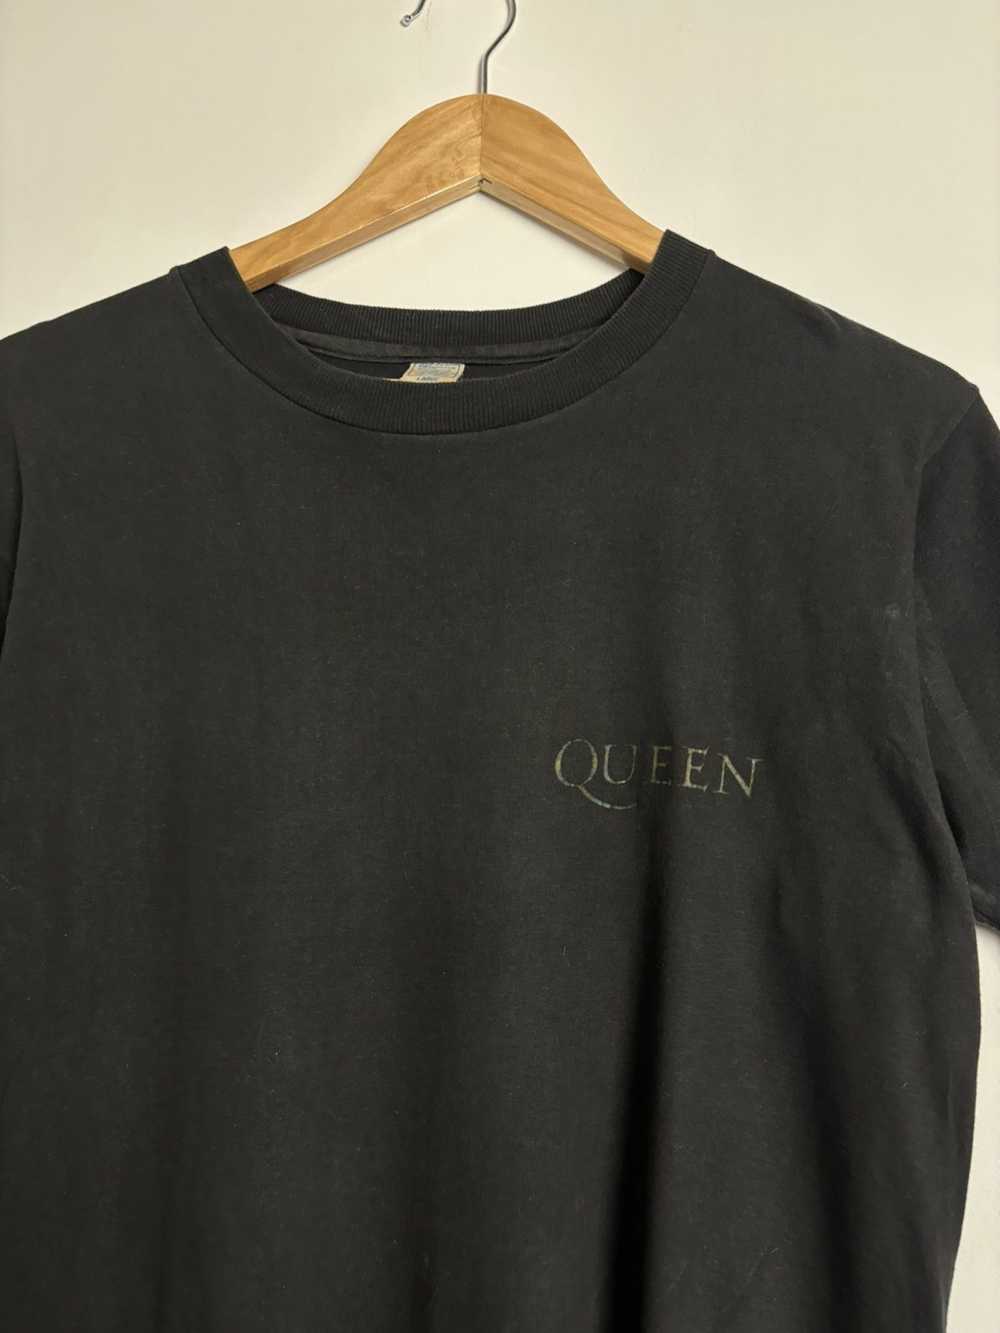 Band Tees × Queen Tour Tee × Rock Tees Vintage 90… - image 3